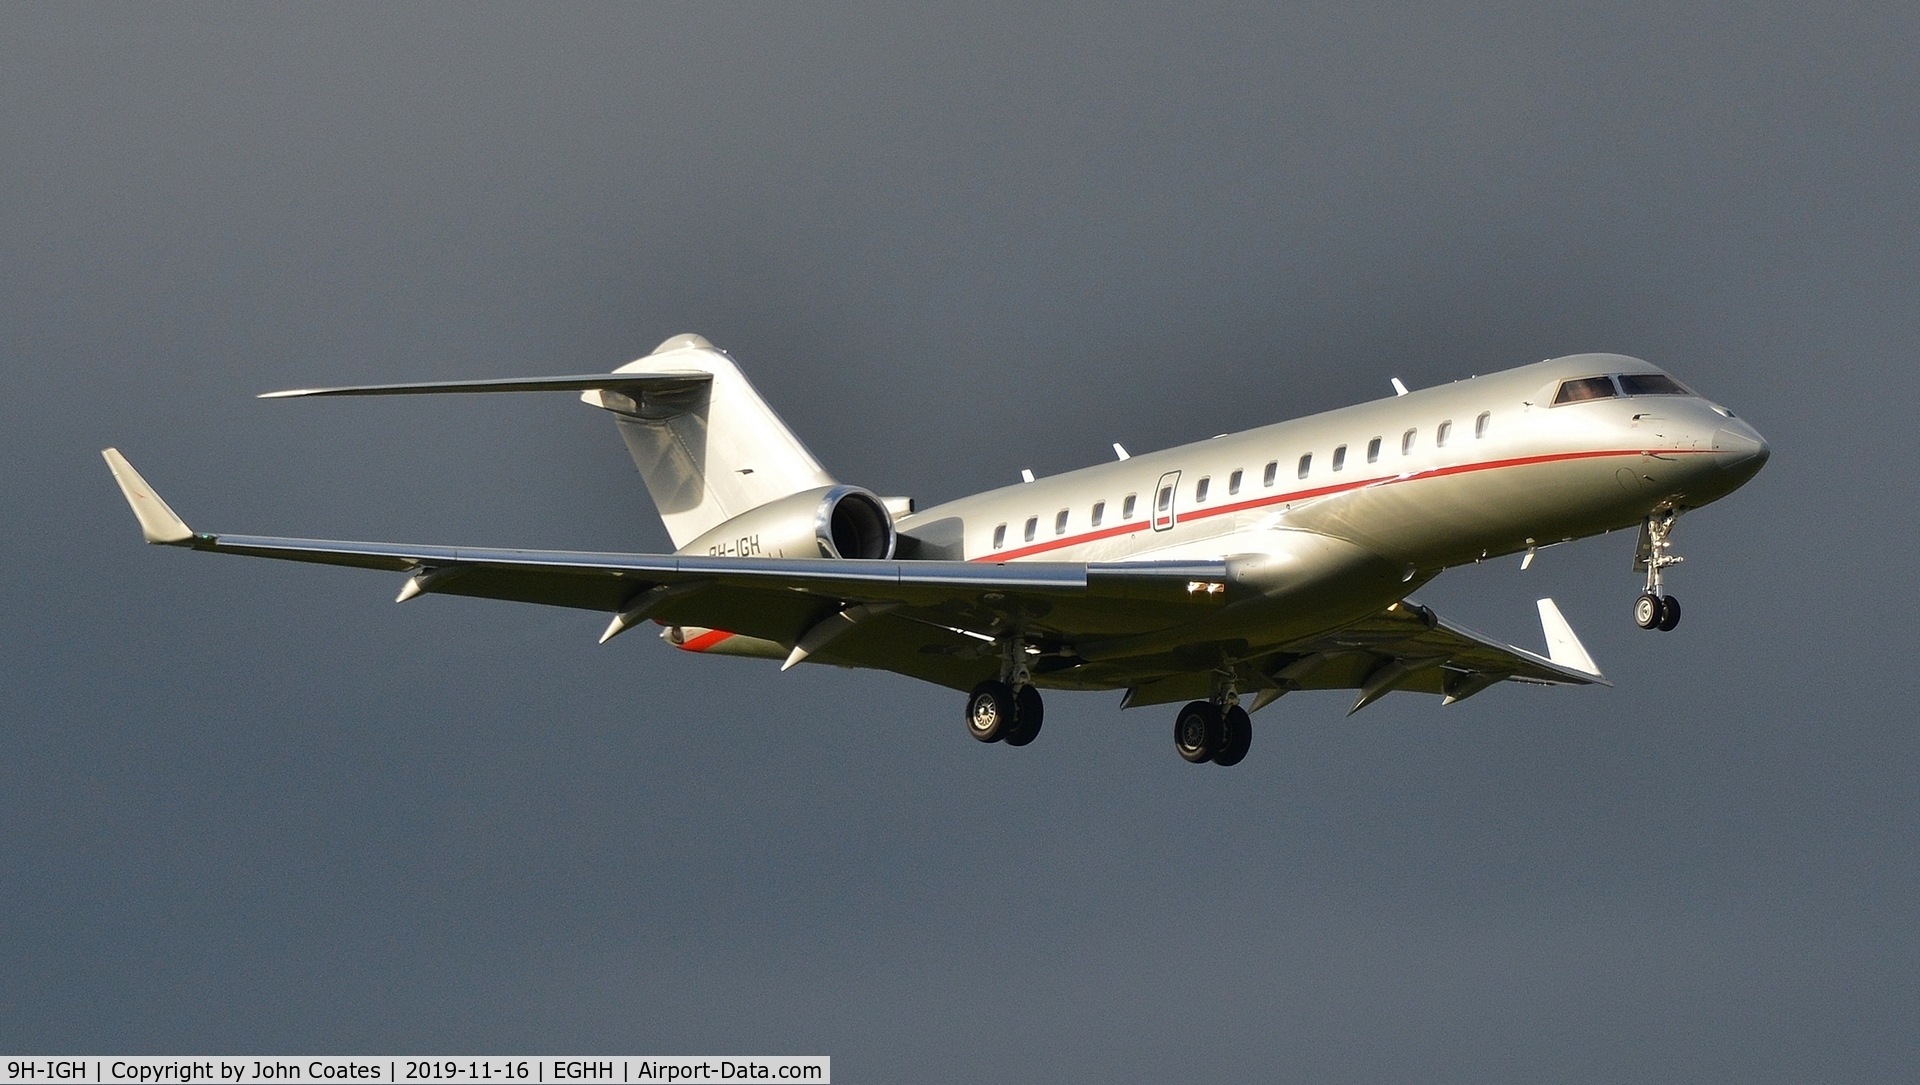 9H-IGH, 2013 Bombardier BD-700-1A10 Global 6000 C/N 9570, On approach during training